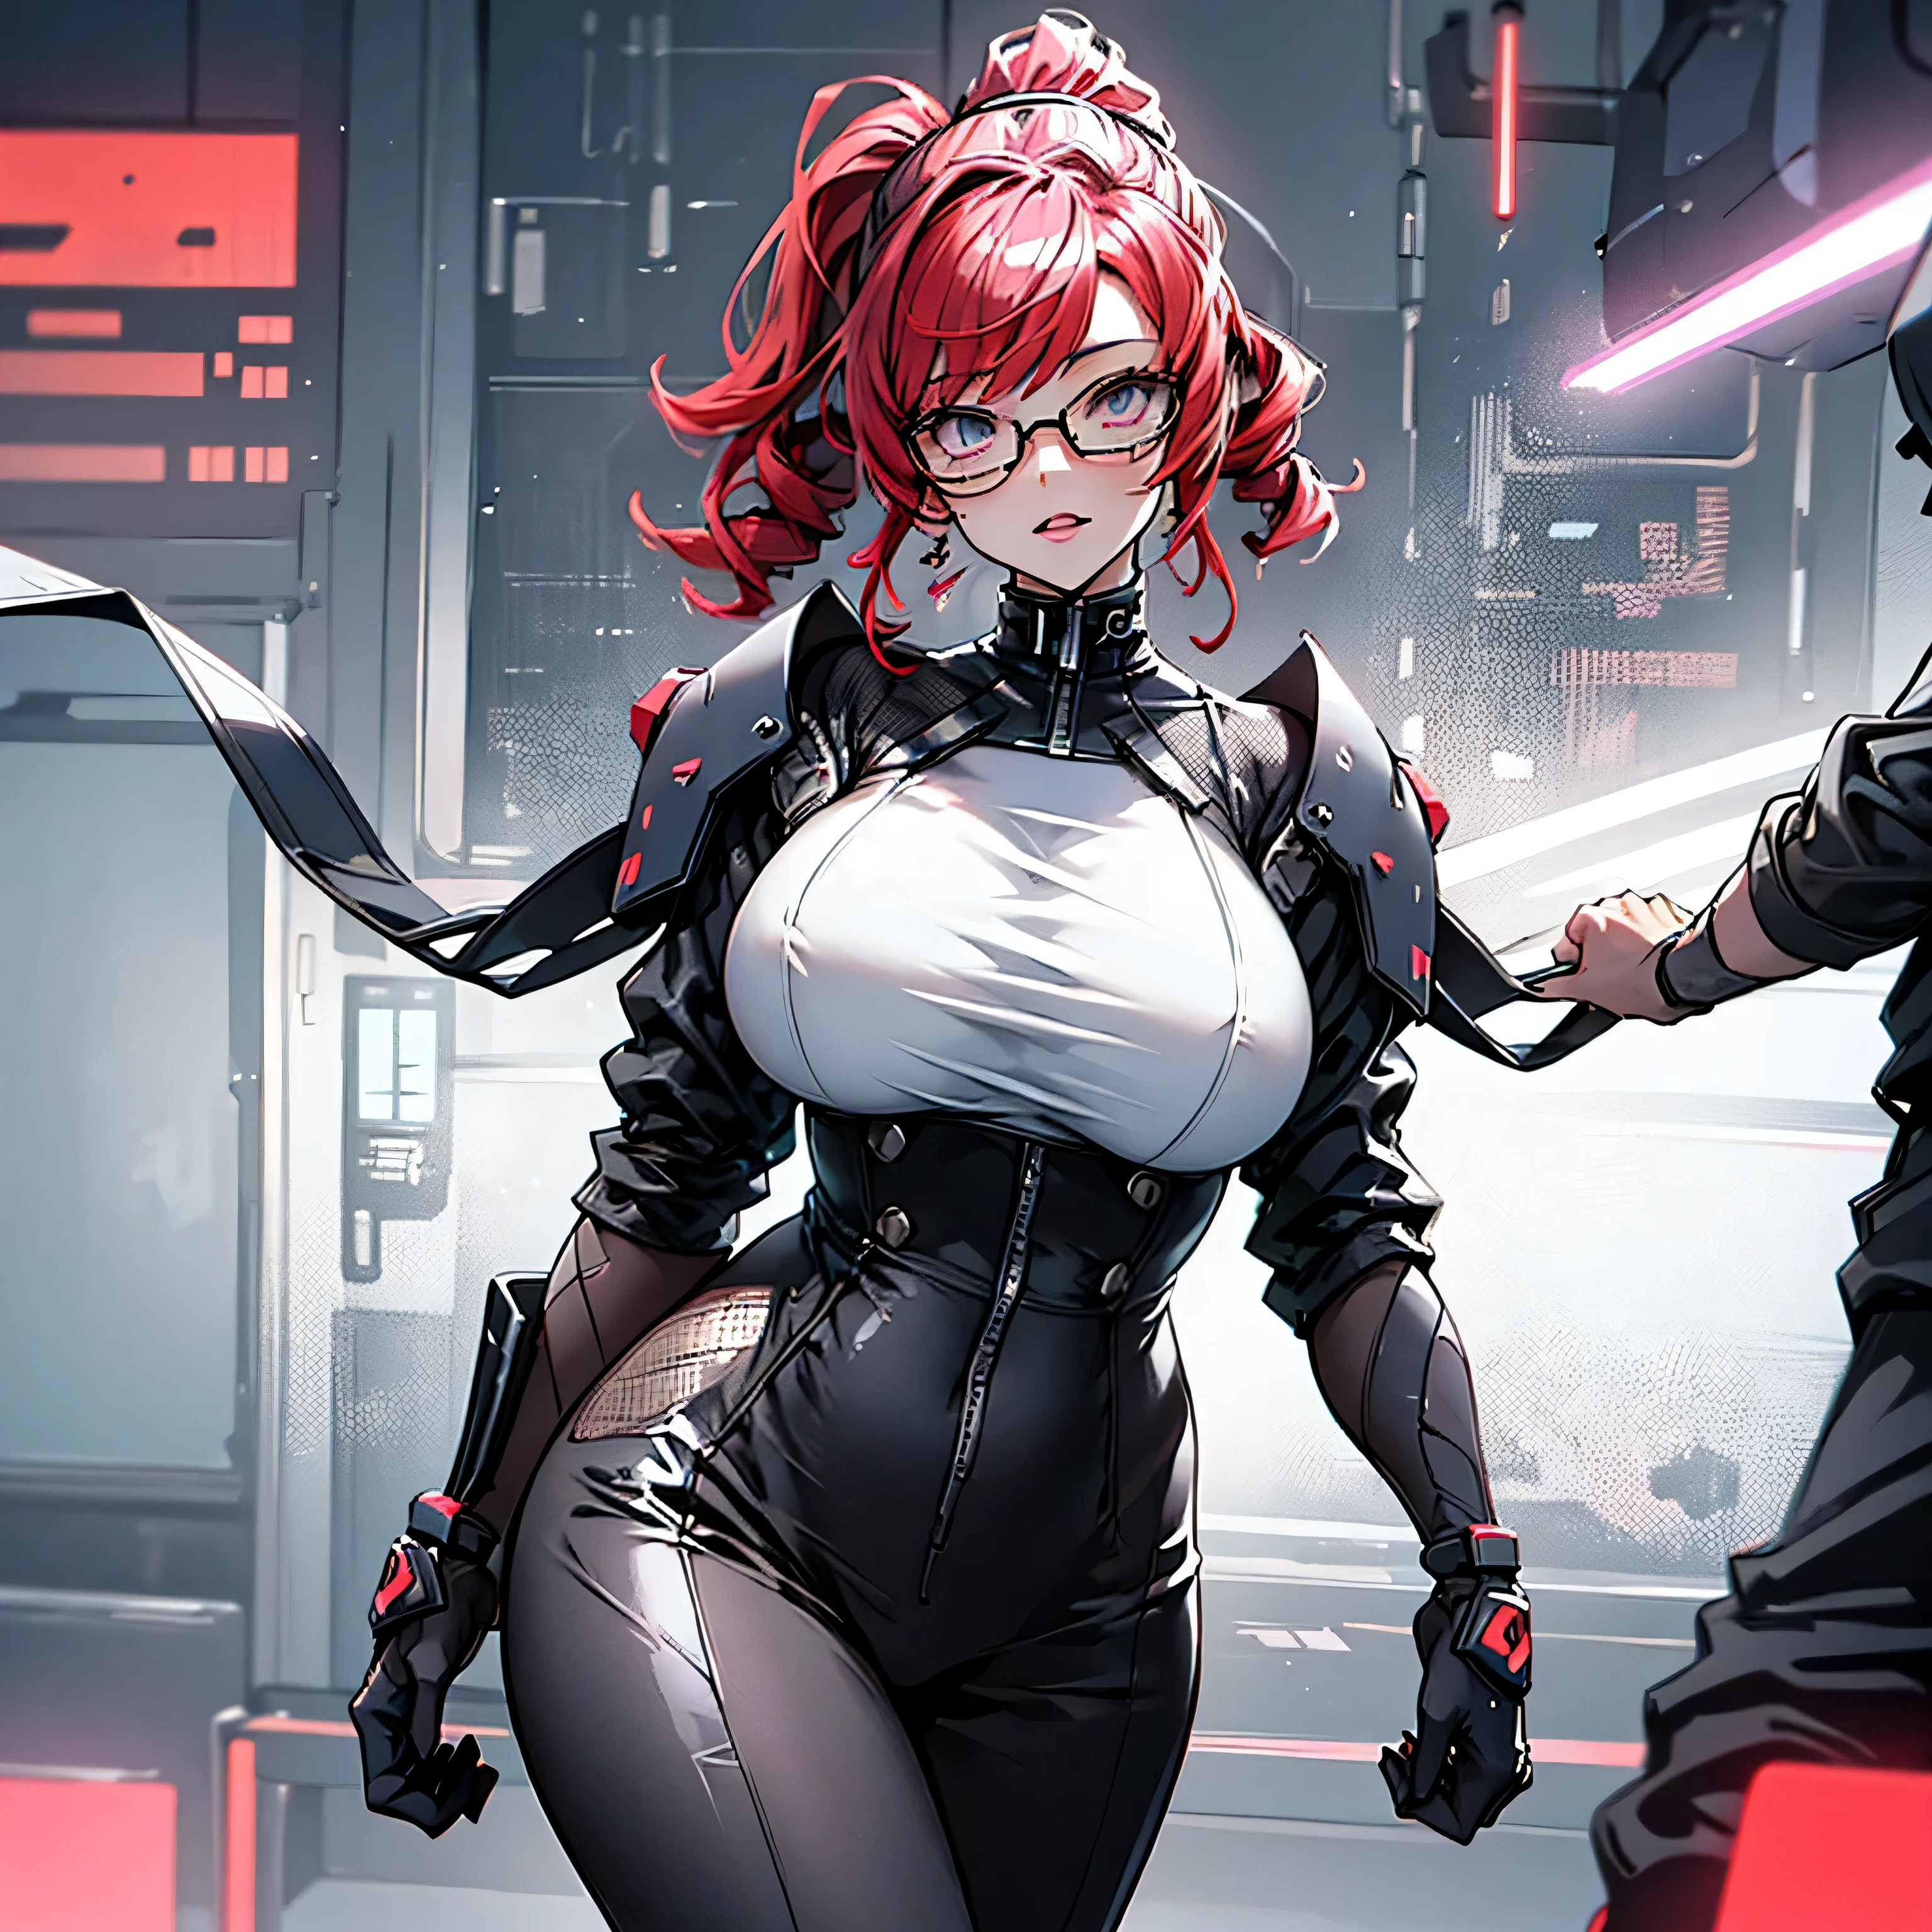 only 1 adult sexy woman, big hips in a corset and a black and white outfit, massive breast, high white curly ponytail, red glasses, with Fishnet on breasts and can be on legs too, humble outfit, wearing techwear and armor, cyberpunk outfit, wearing japanese techwear, intriguing outfit, all black cyberpunk clothes, cyberpunk style outfit, female cyberpunk anime girl, cyberpunk streetwear, cyberpunk dress, anime girl , photograph of a techwear woman, cyberpunk anime girl, wearing cyberpunk streetwear, normal proportion of an adult woman, not too short or fat, the whole pic in purple tones, nsfw